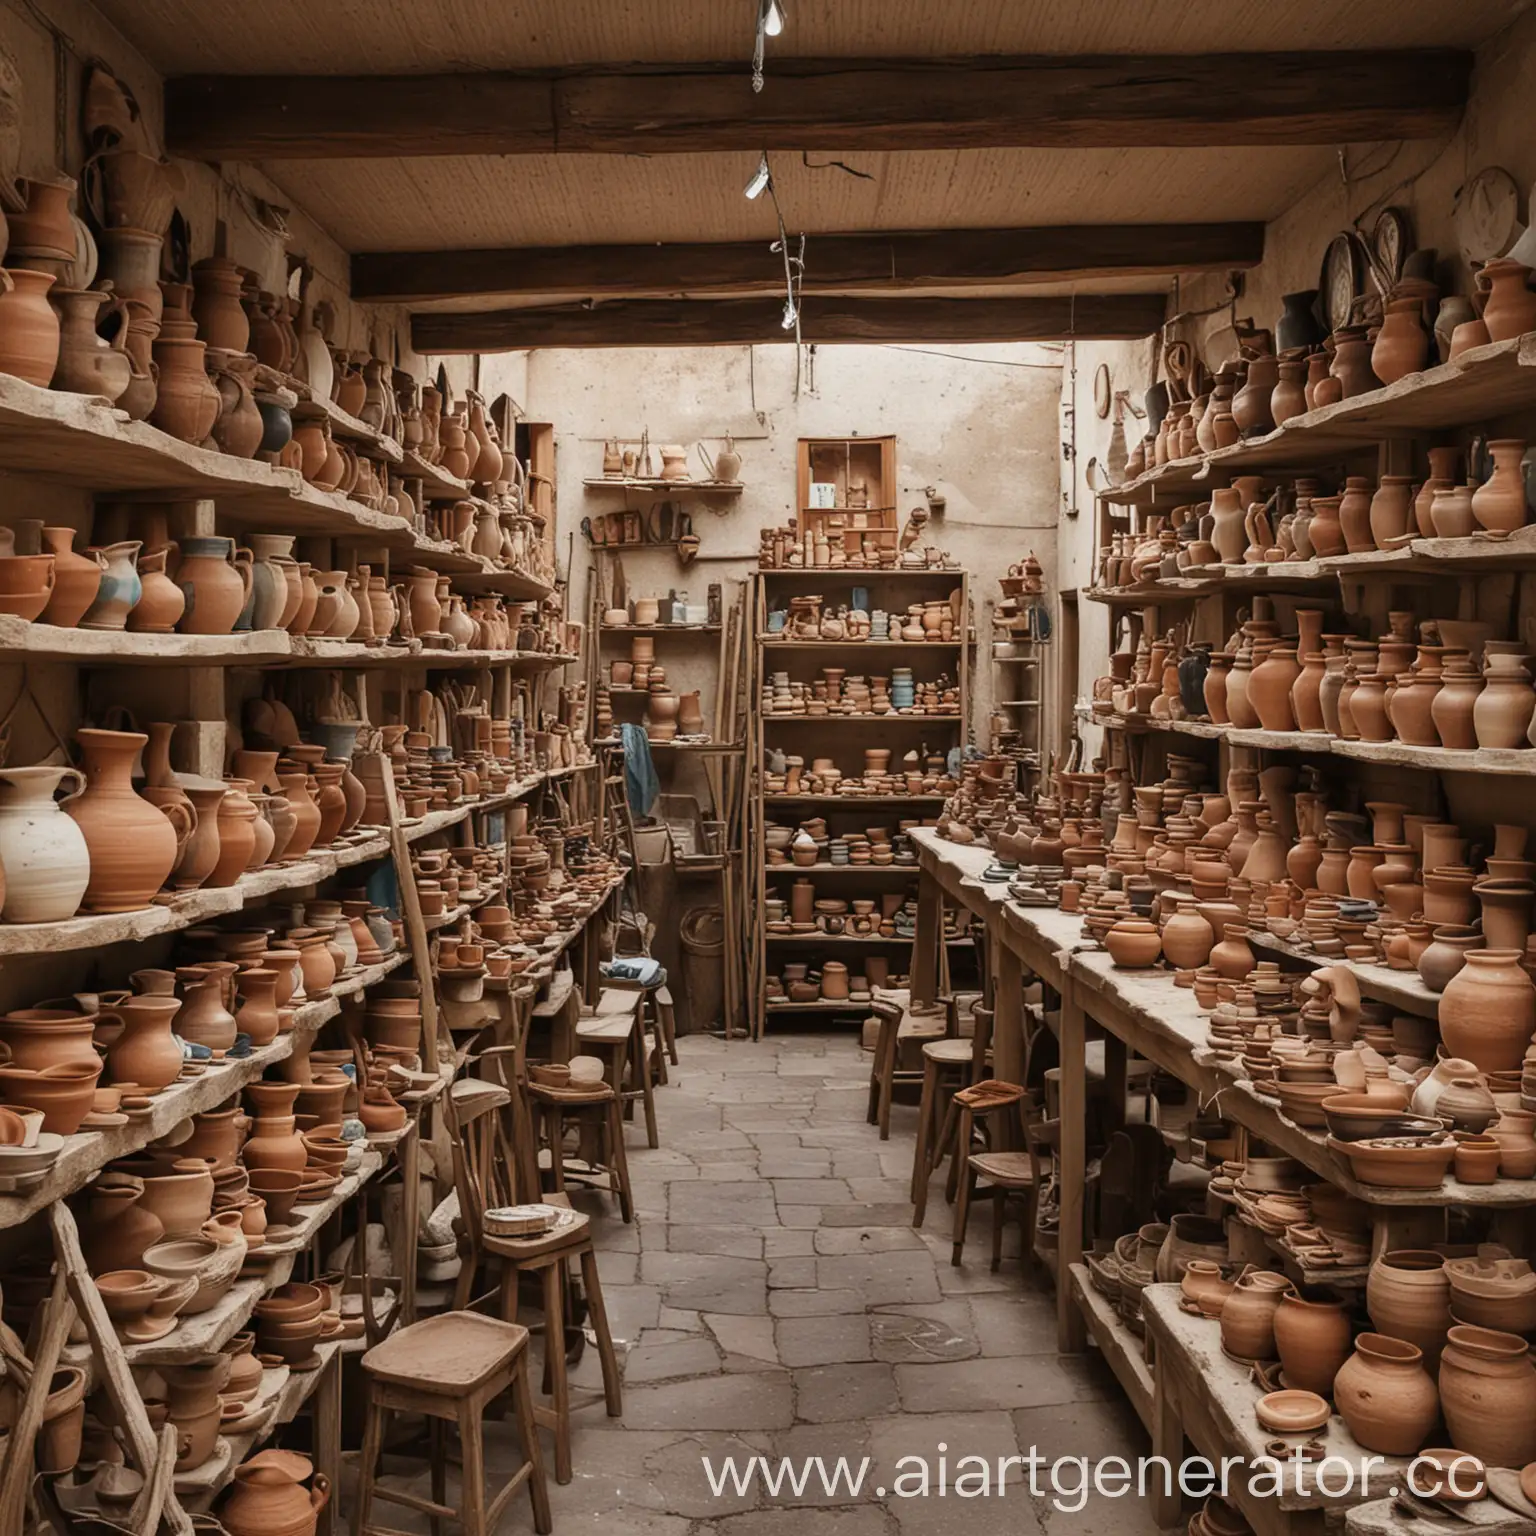 Artisan-Crafting-Pottery-in-Vibrant-Pottery-Shop-Scene